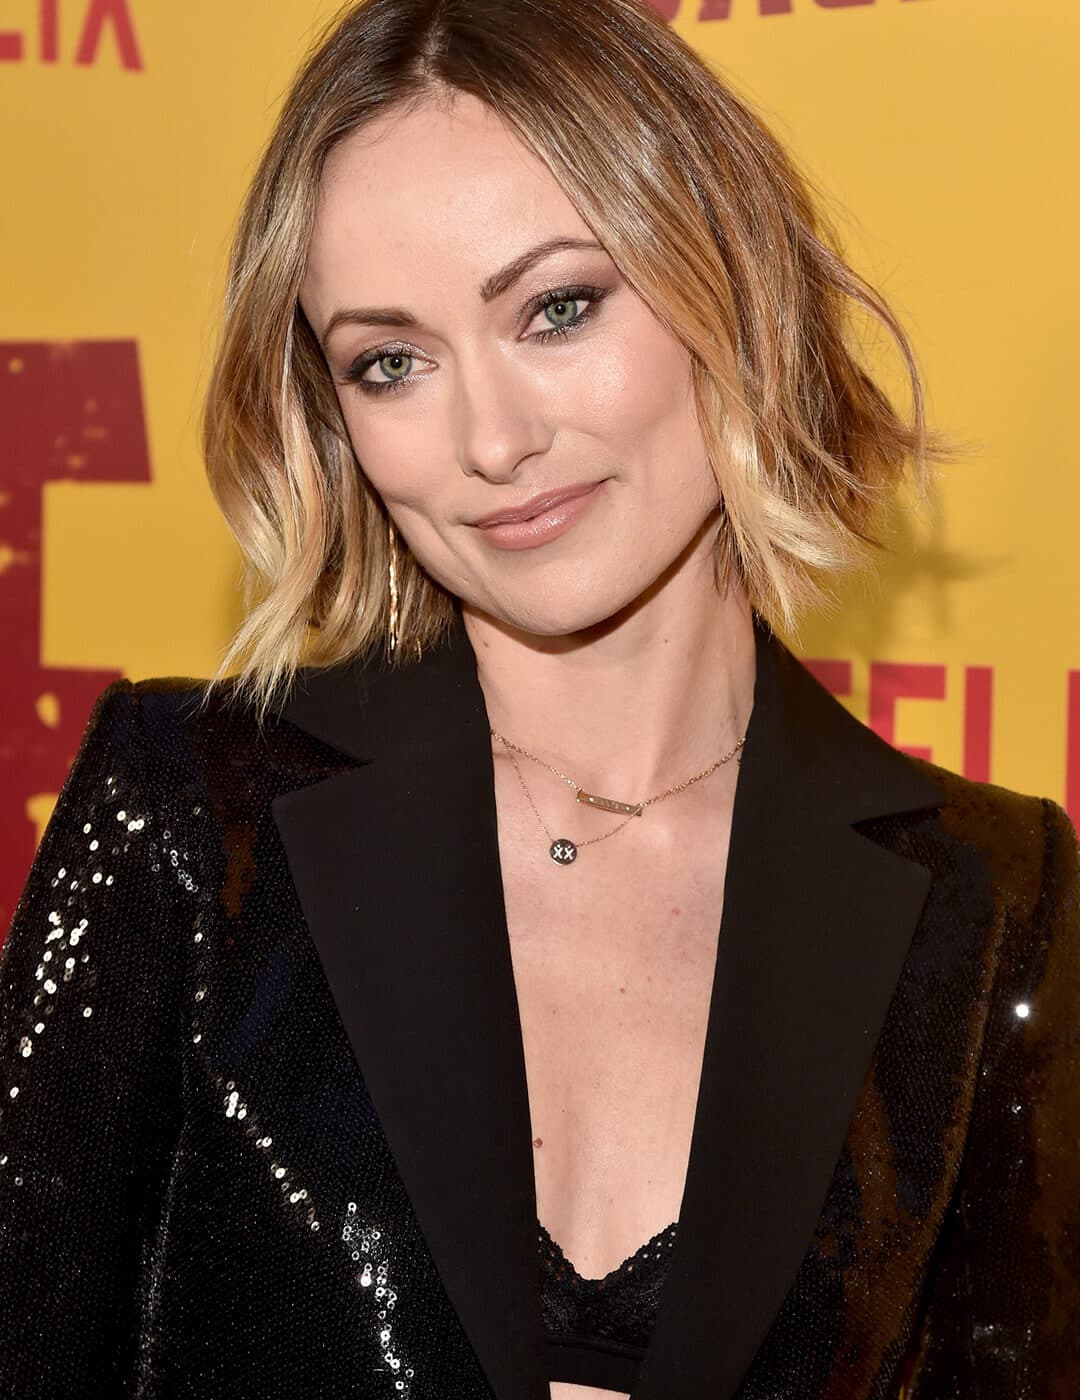 Olivia Wilde rocking a sequined suit, short balayage hair, and neutral makeup